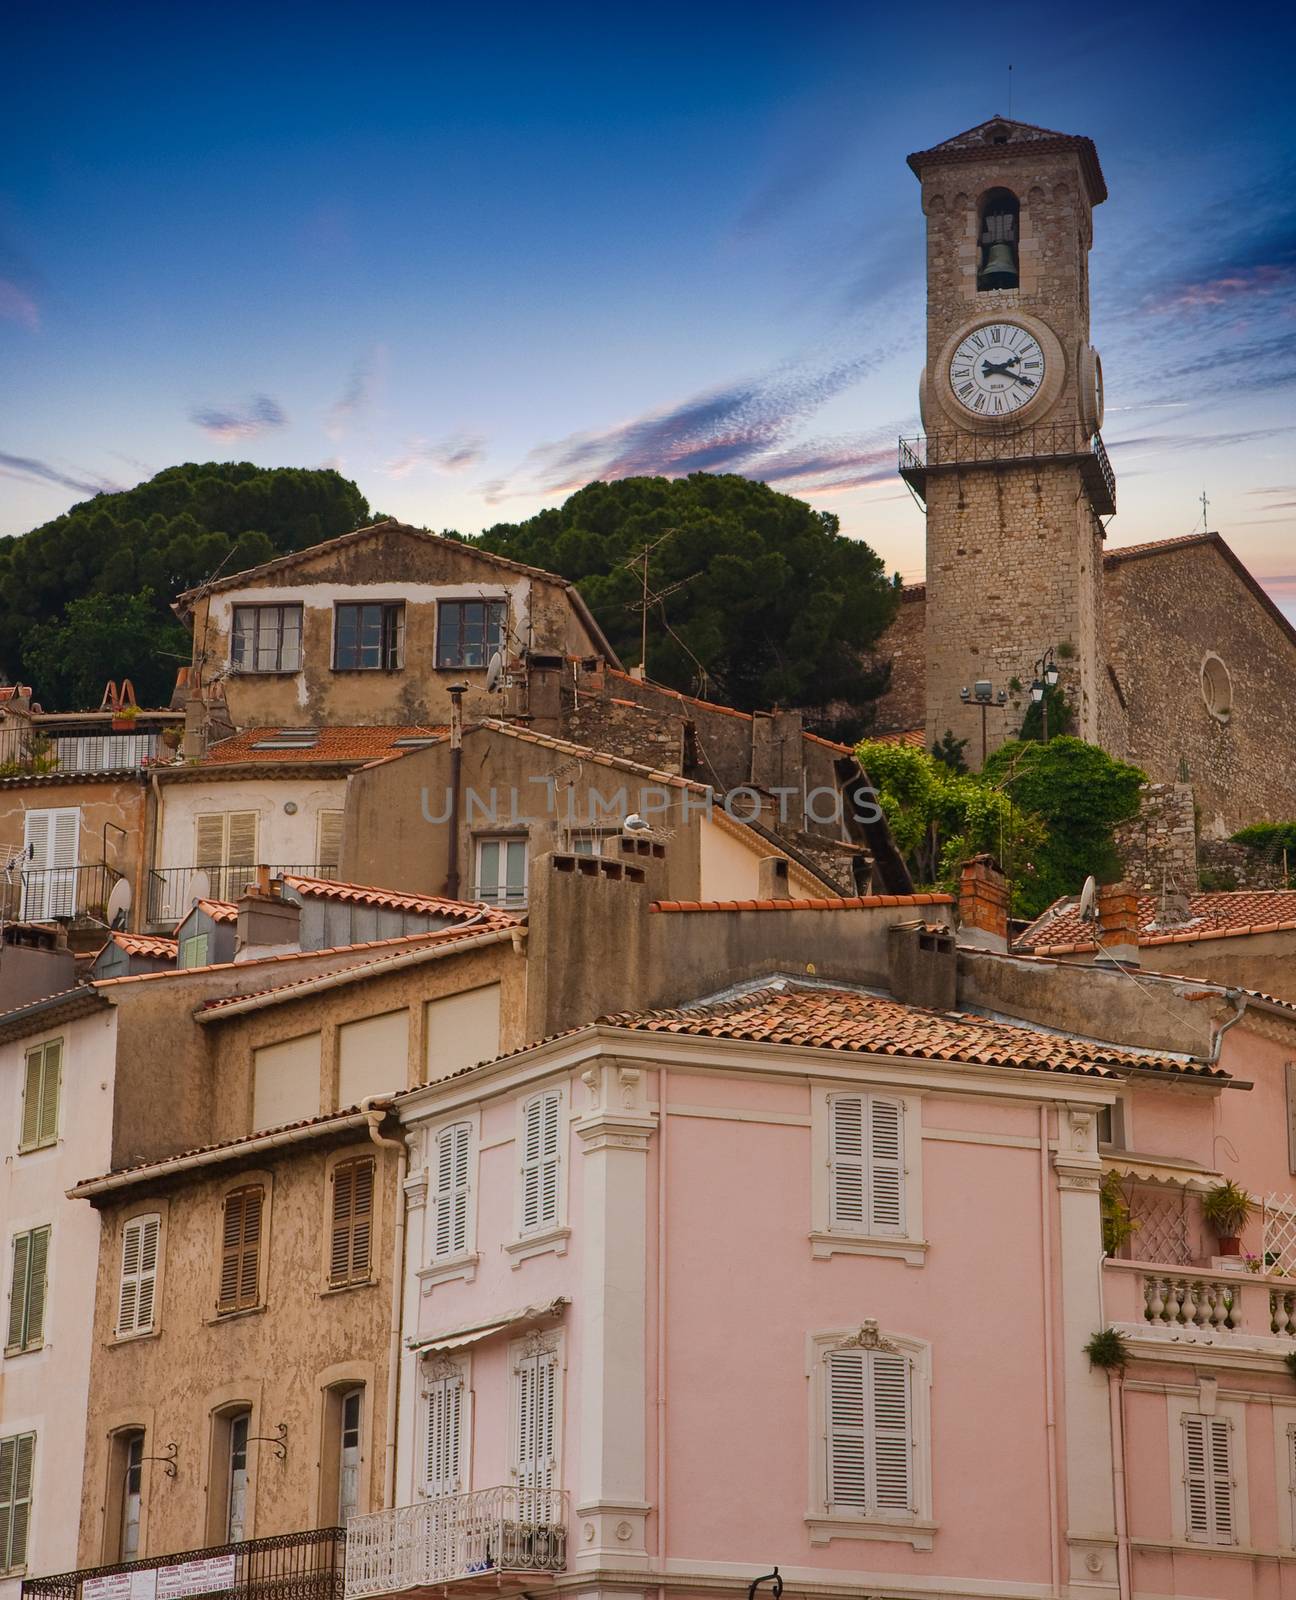 Clock Tower Above Cannes Apartments by dbvirago